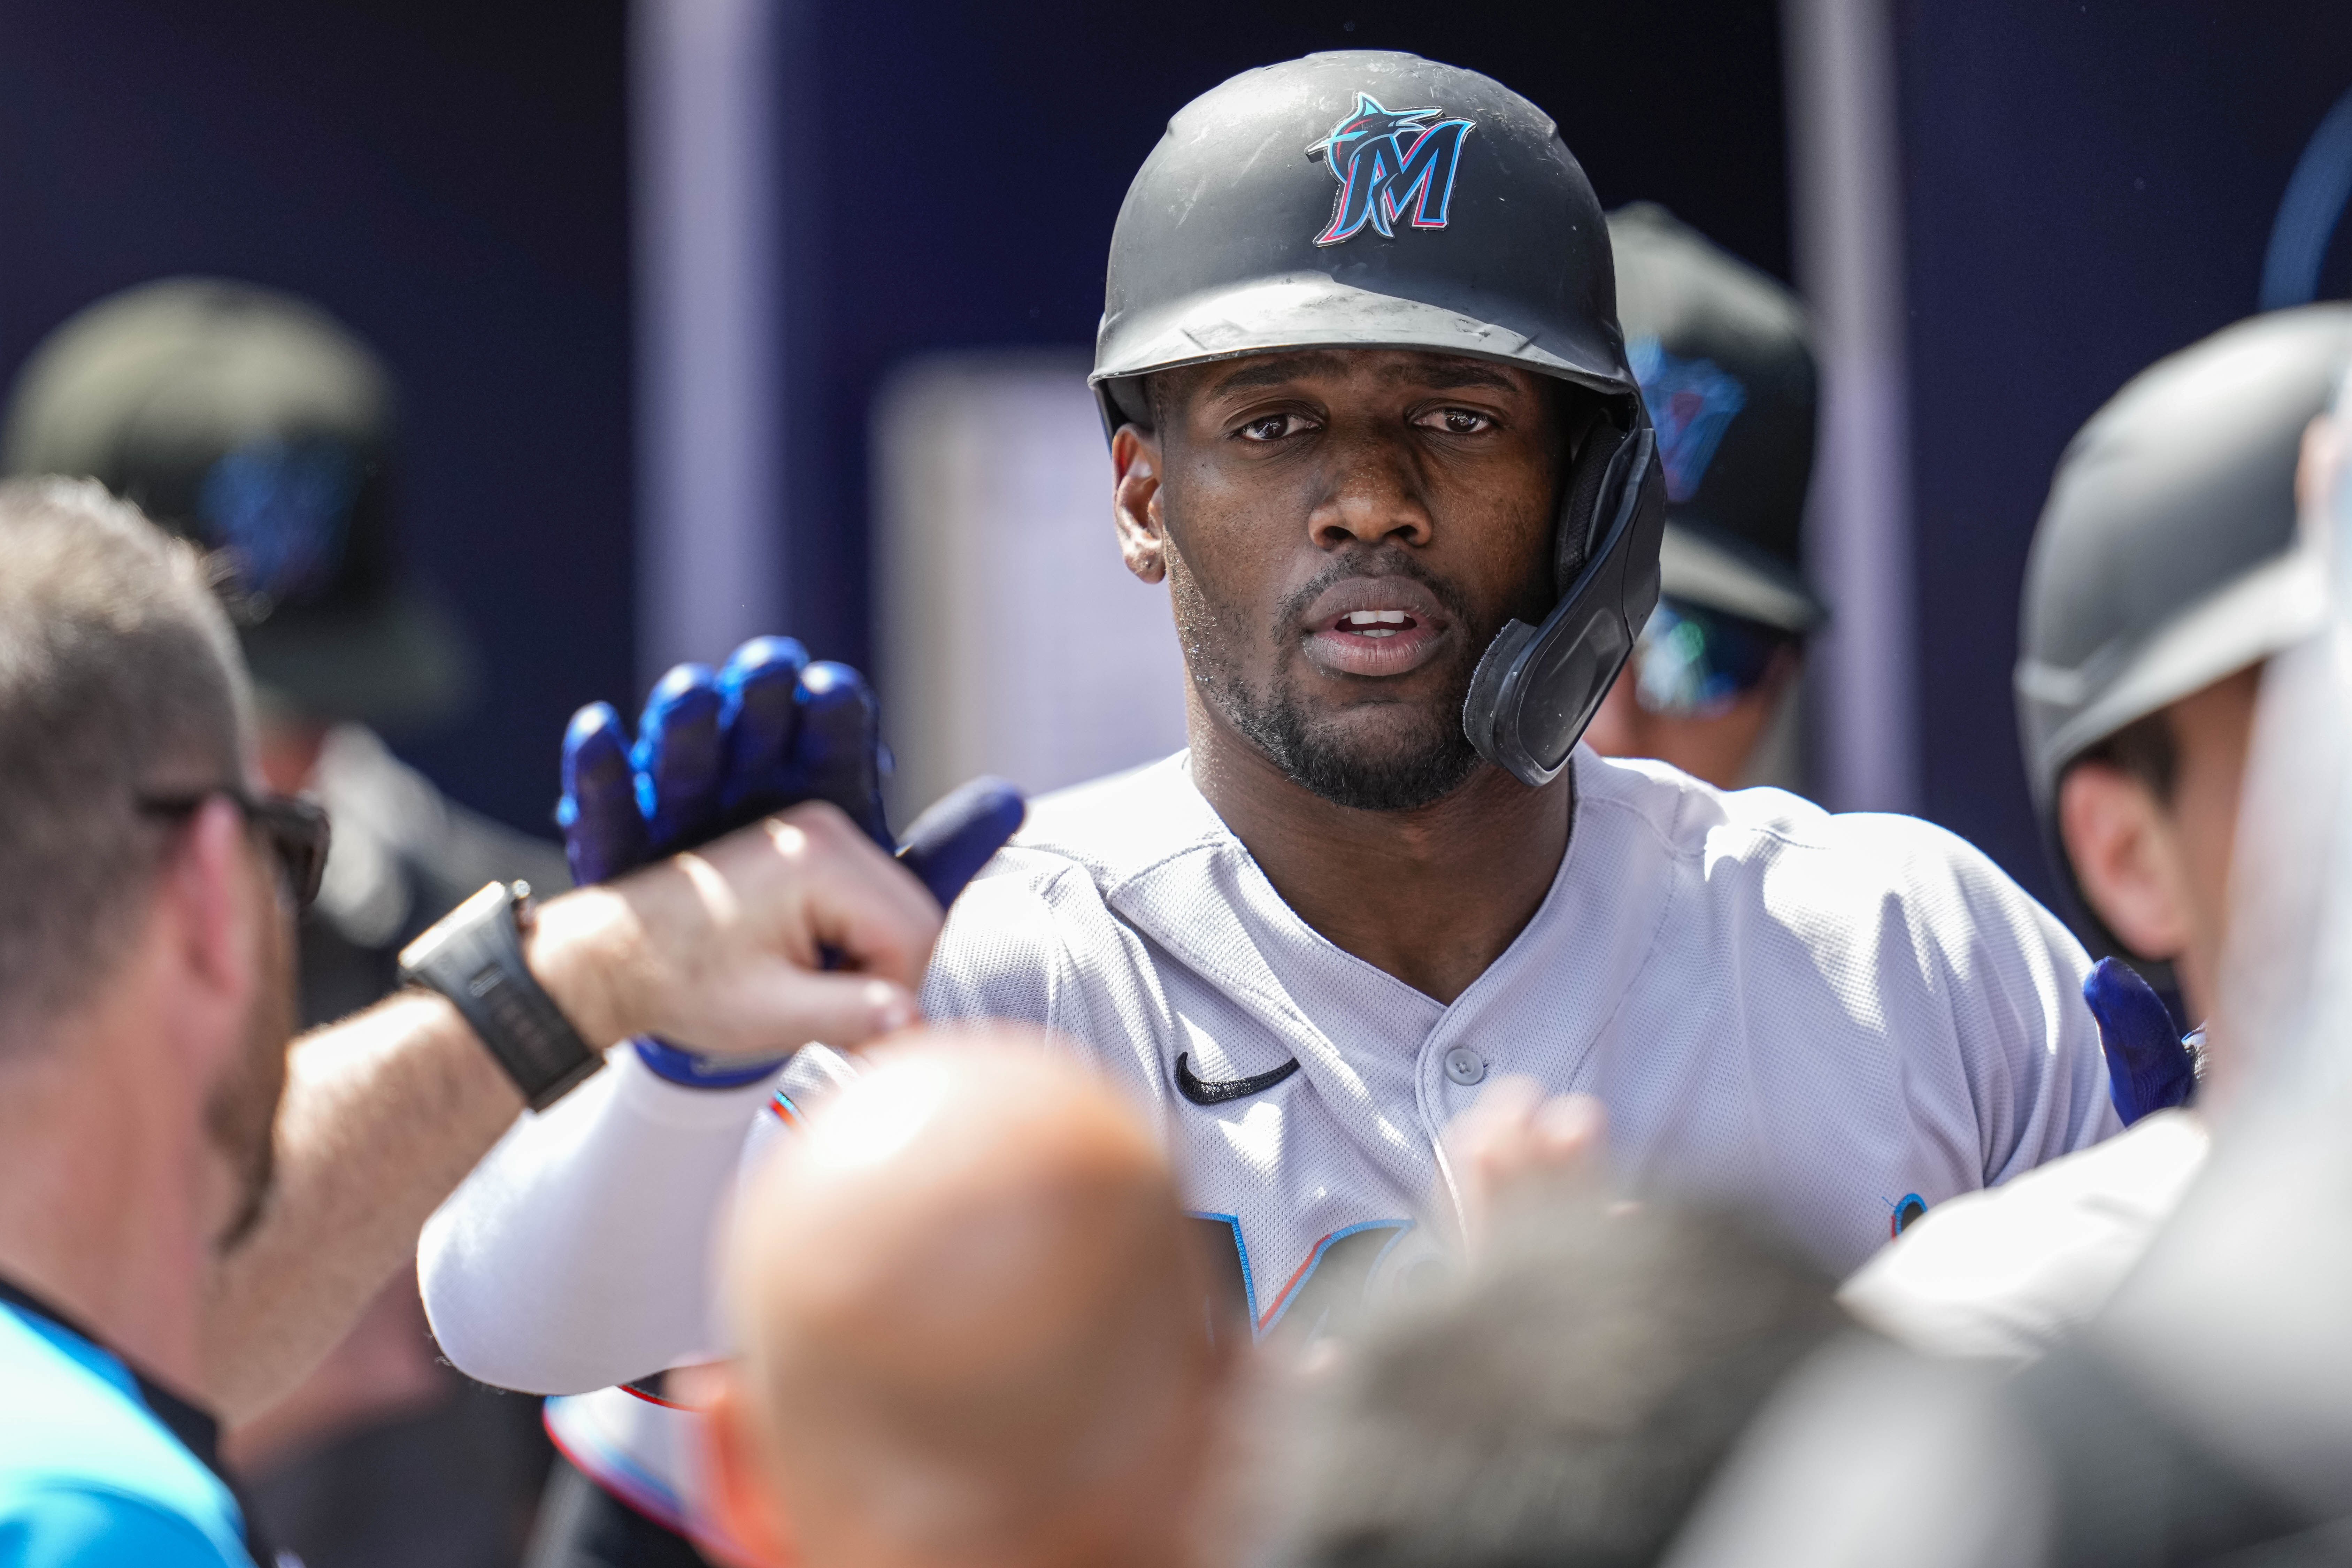 Miami Marlins designated hitter Jorge Soler (12) reacts in the dugout after hitting a two run home run against the Atlanta Braves during the seventh inning at Truist Park.